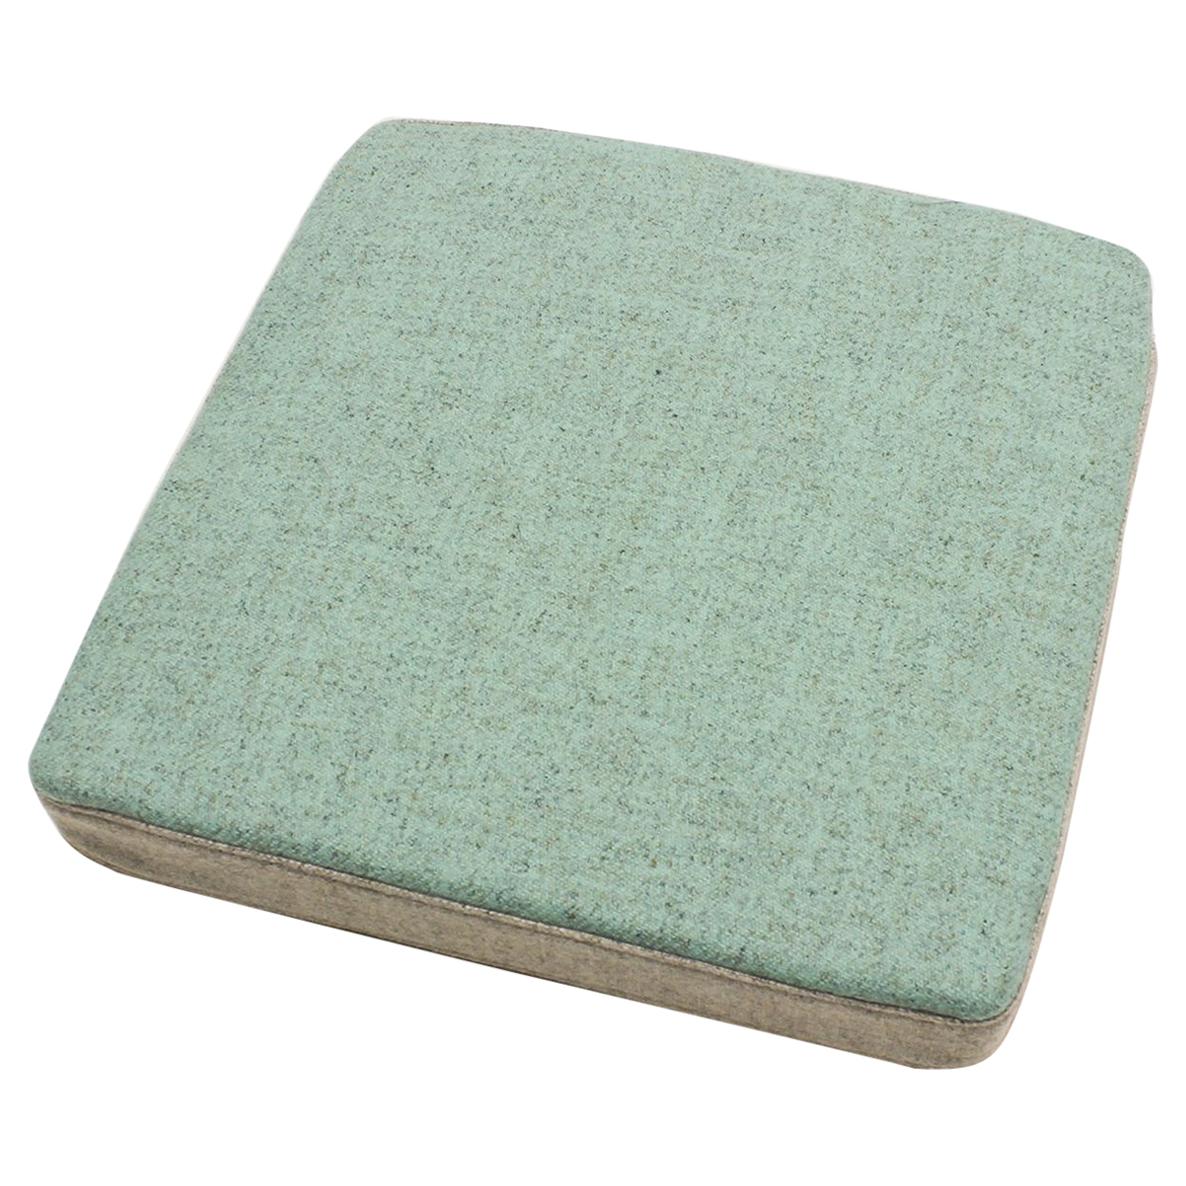 OPE, Ope Select, Cushion / Sound Absorber, Green For Sale